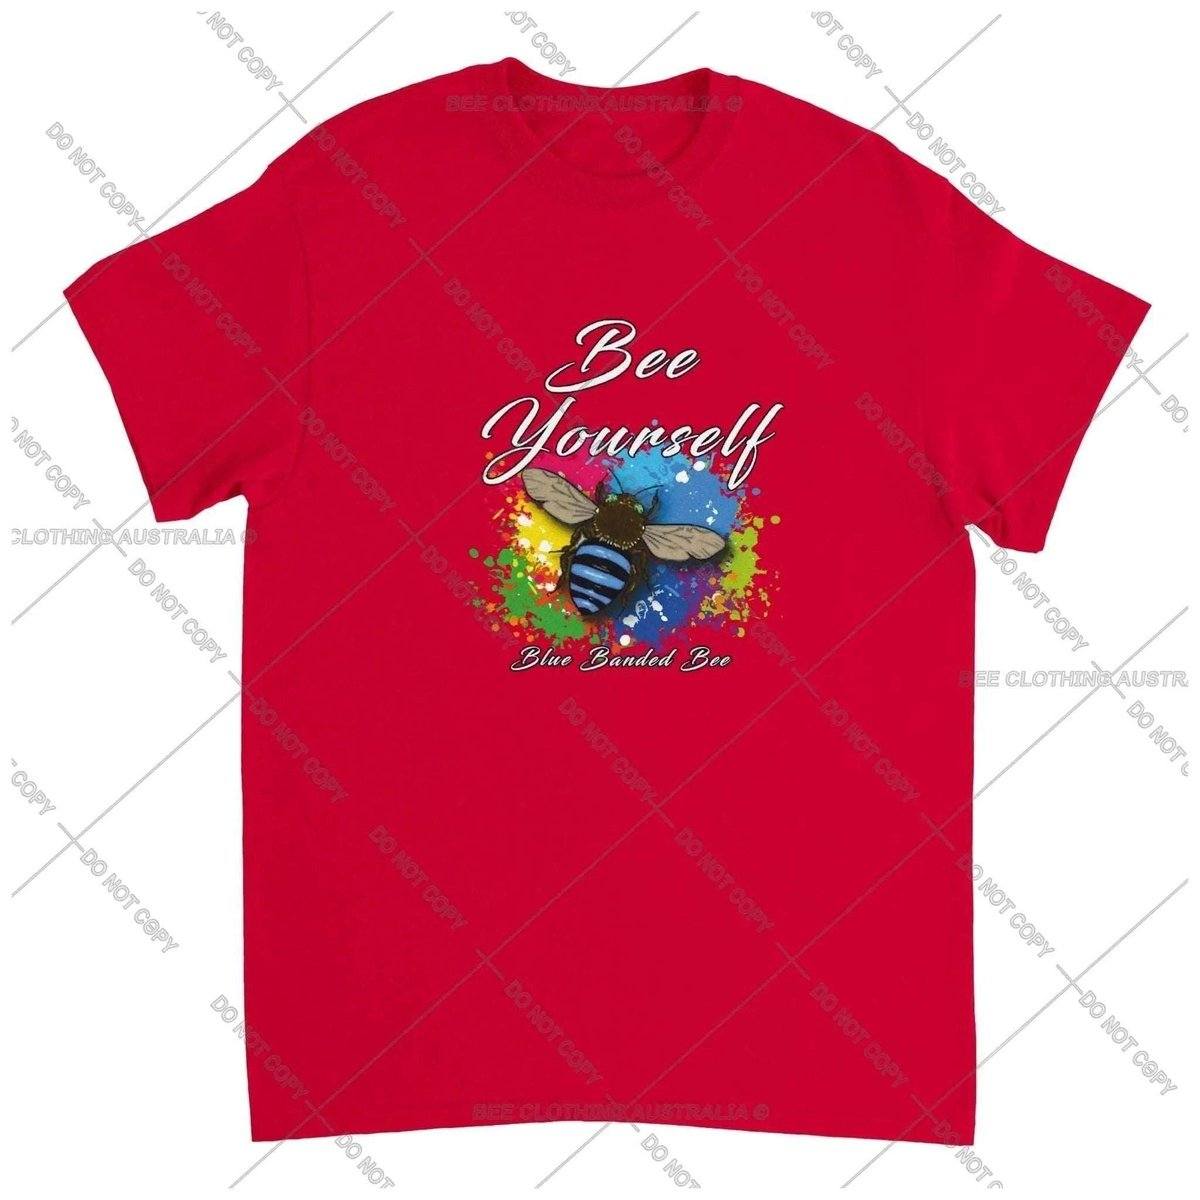 Bee Yourself - Blue Banded Bee - Native Bee T-Shirt Unisex Australia Online Color Red / S